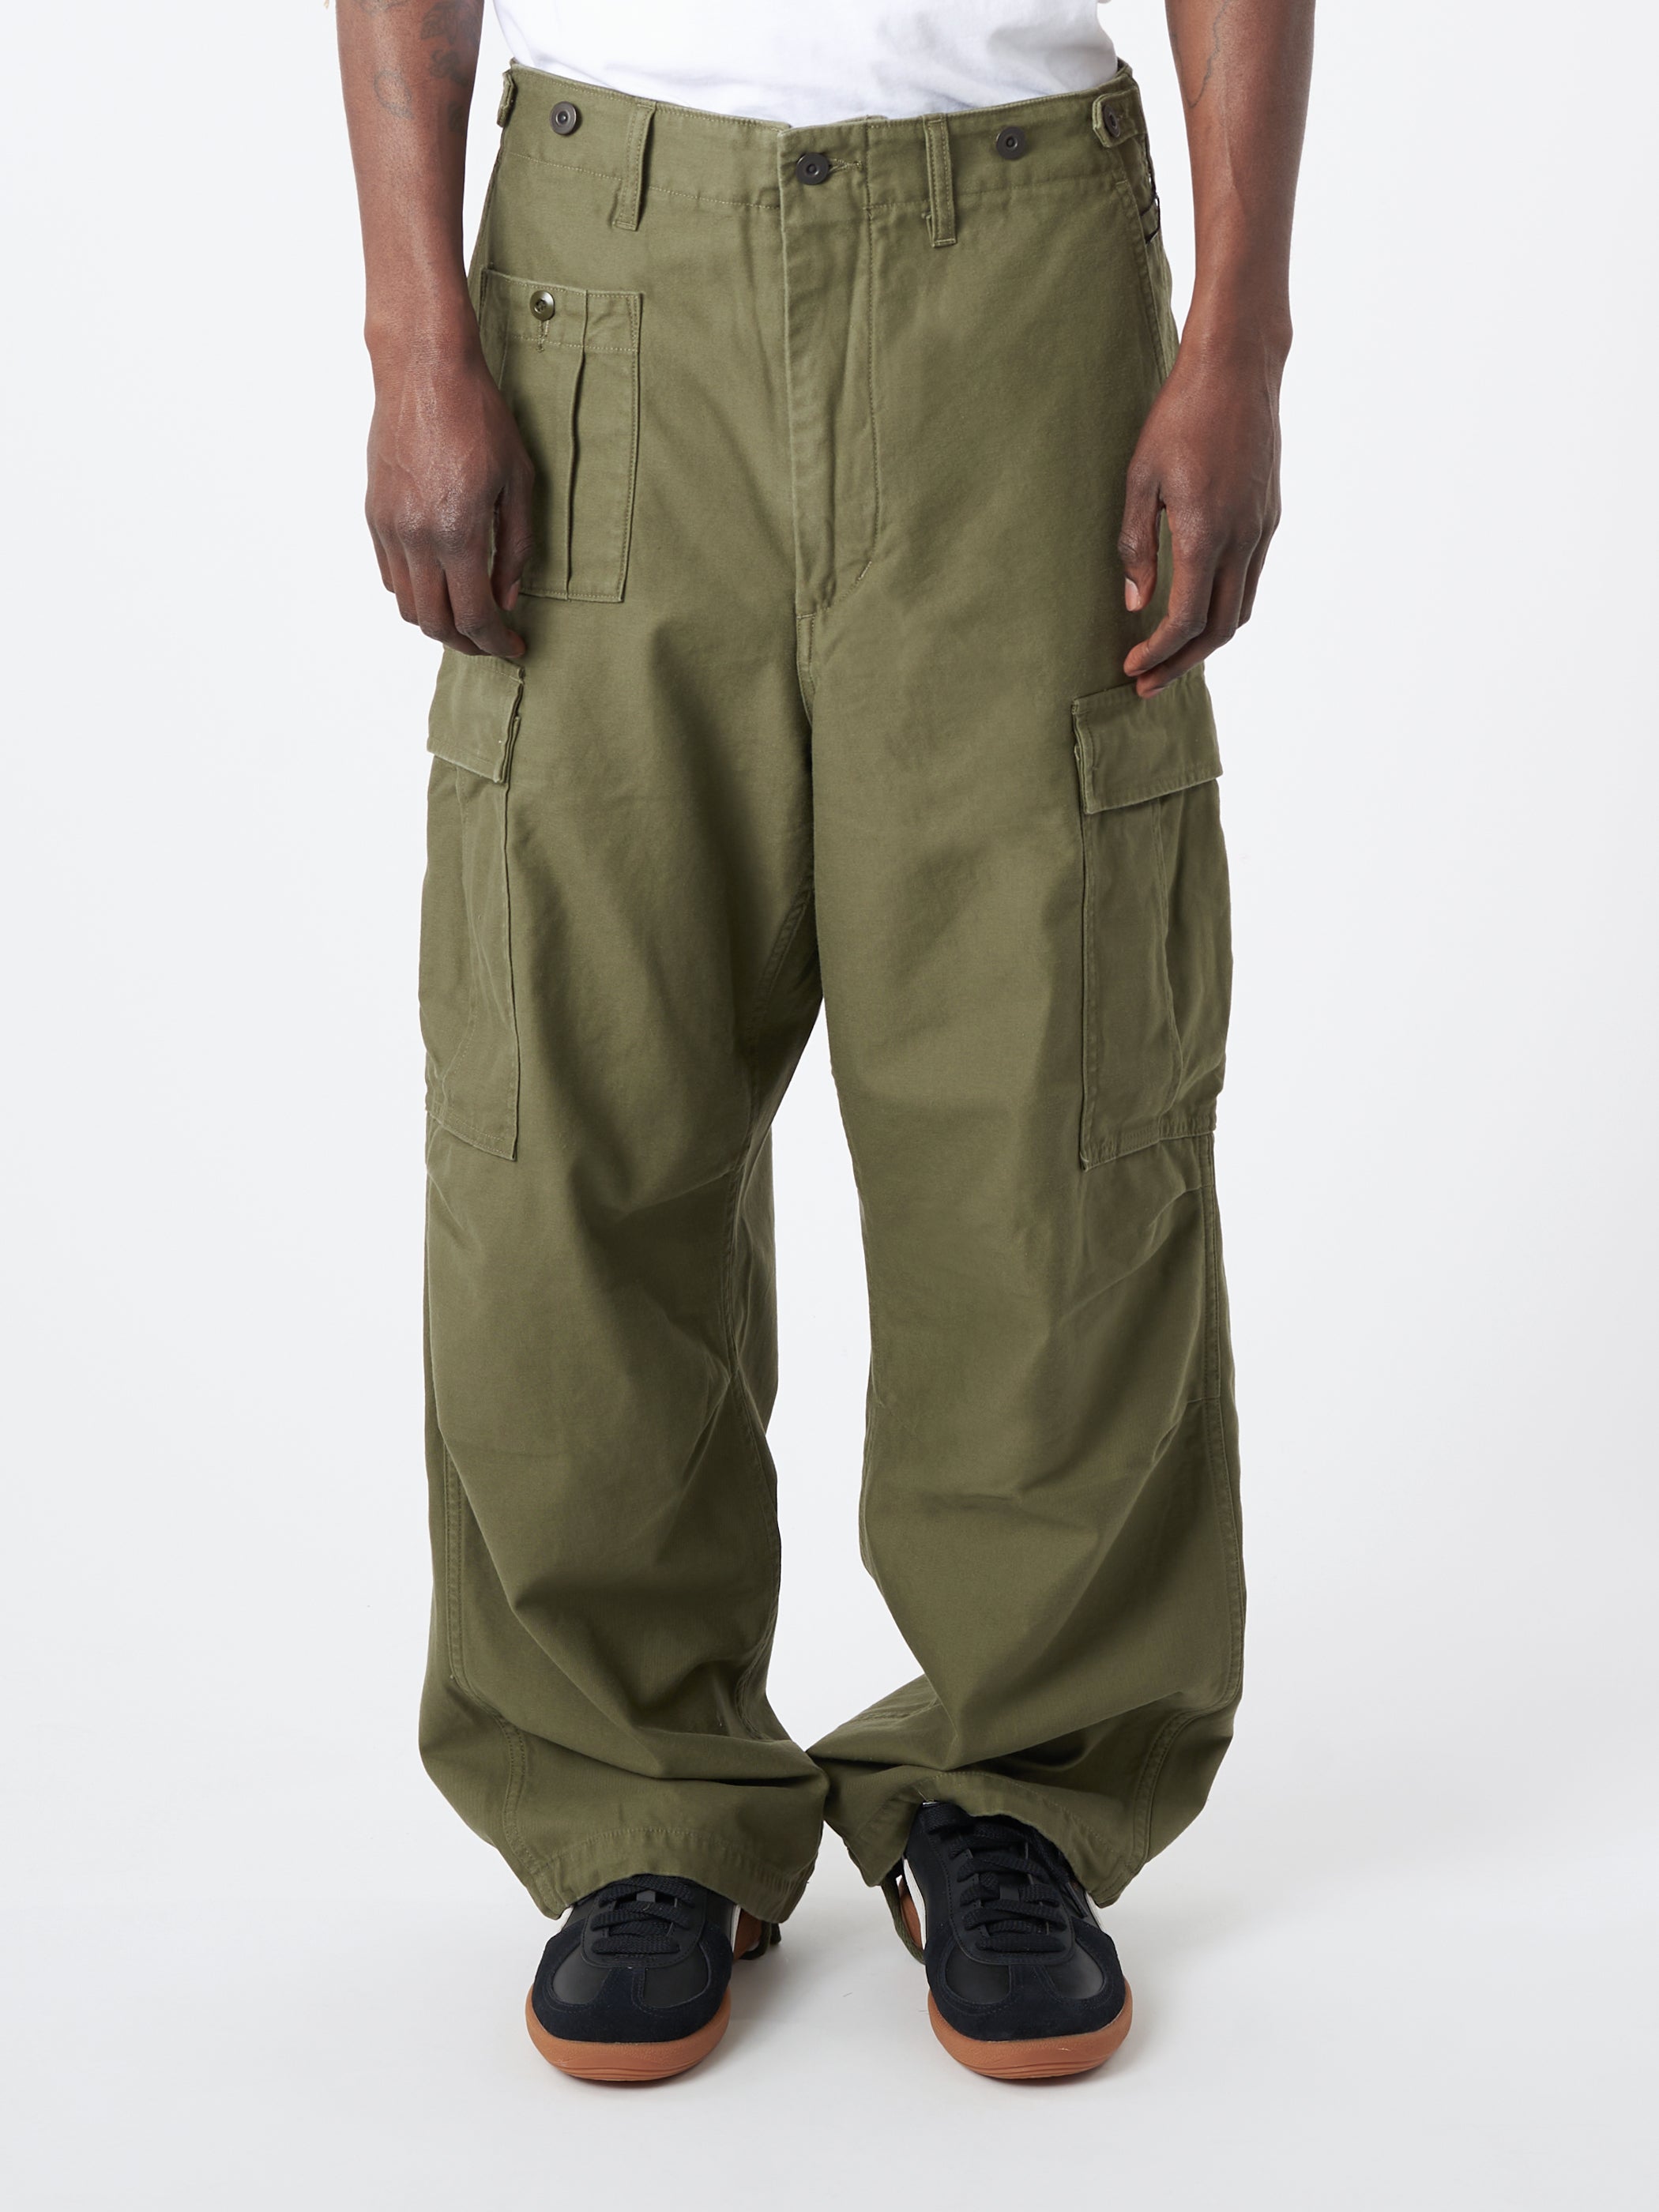 Army Cargo Pant